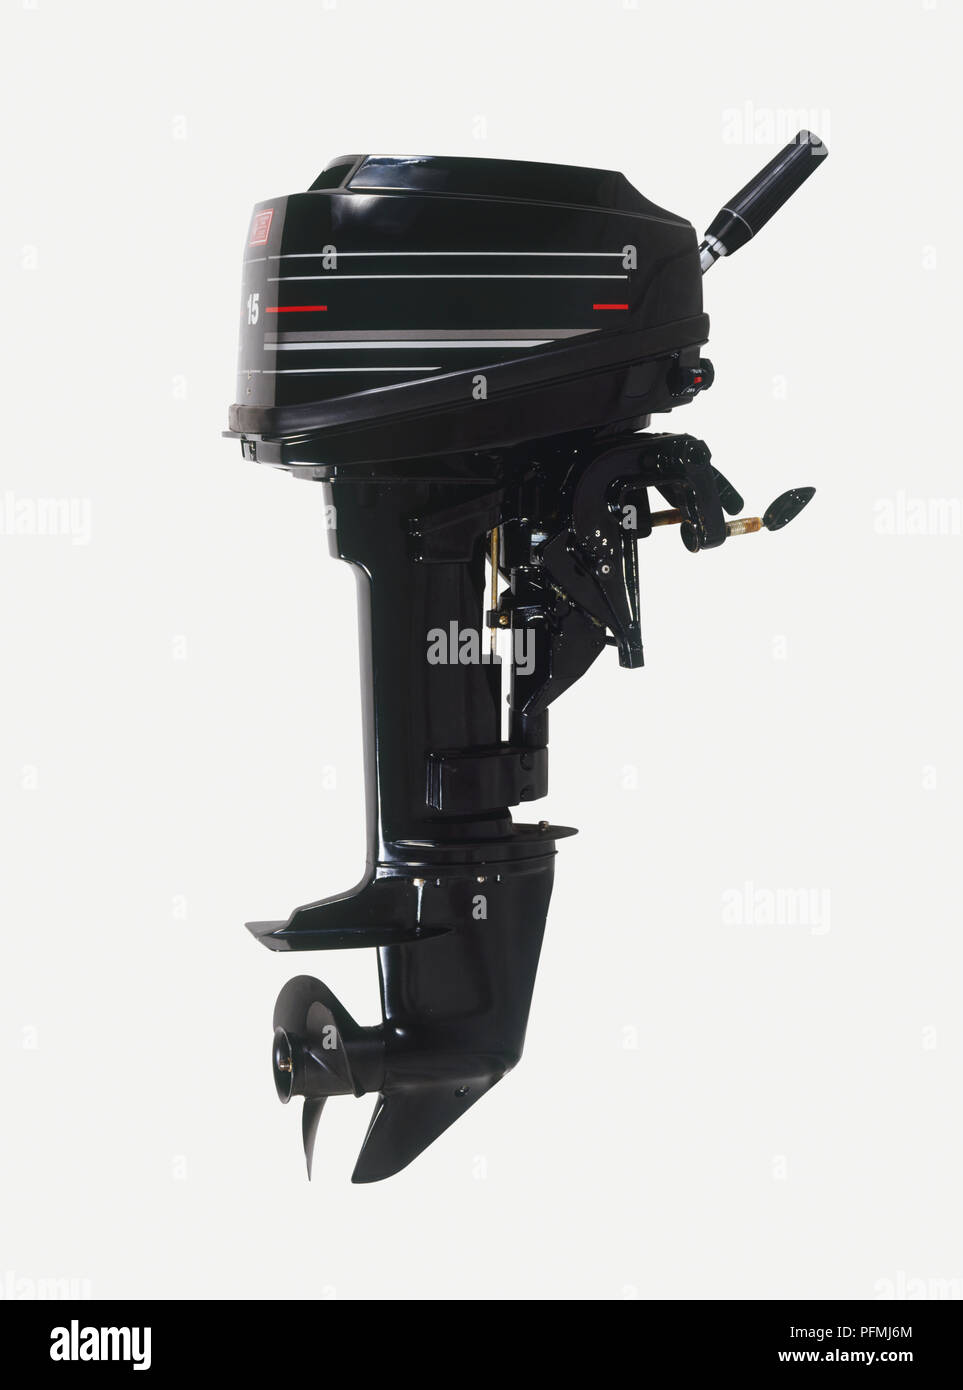 Outboard motor for small Boat Stock Photo